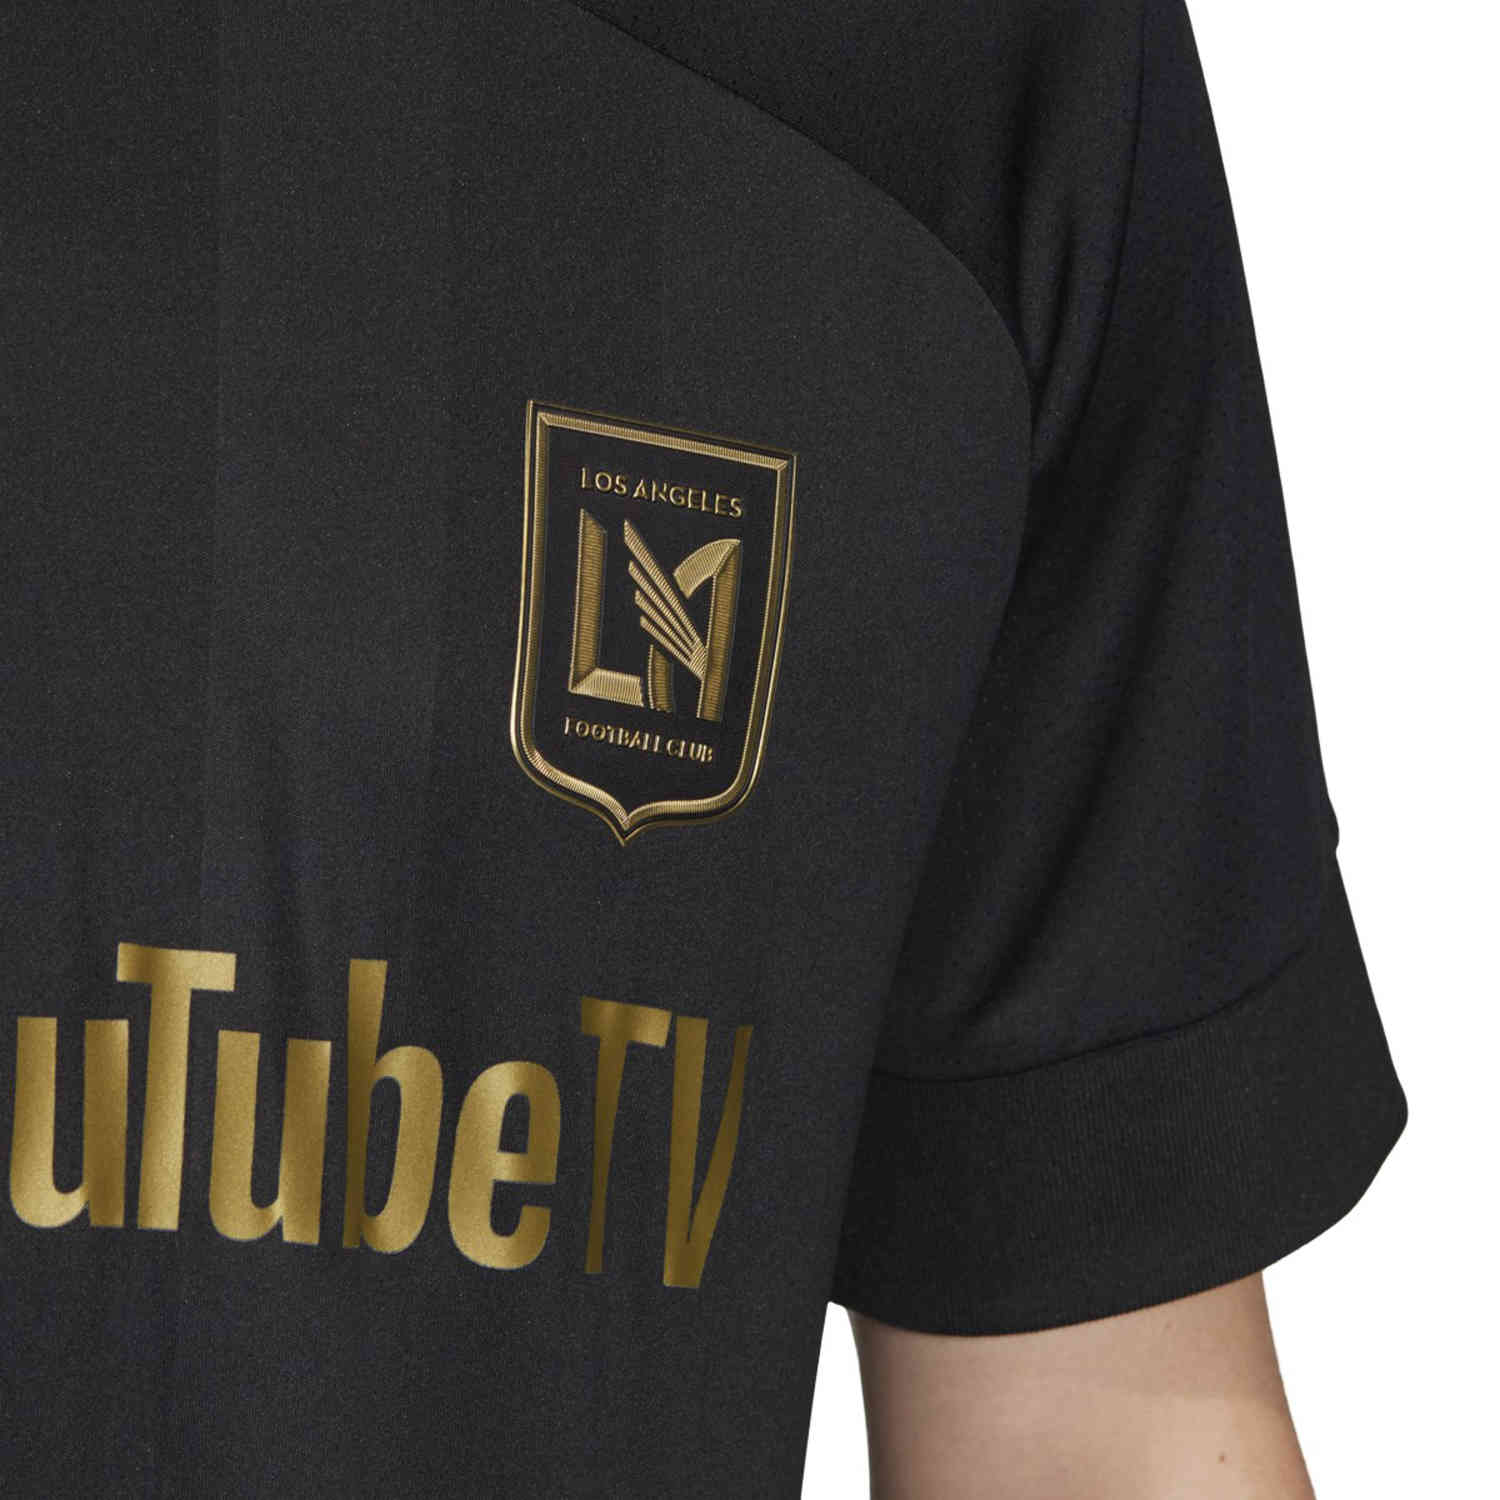 lafc authentic jersey 2020